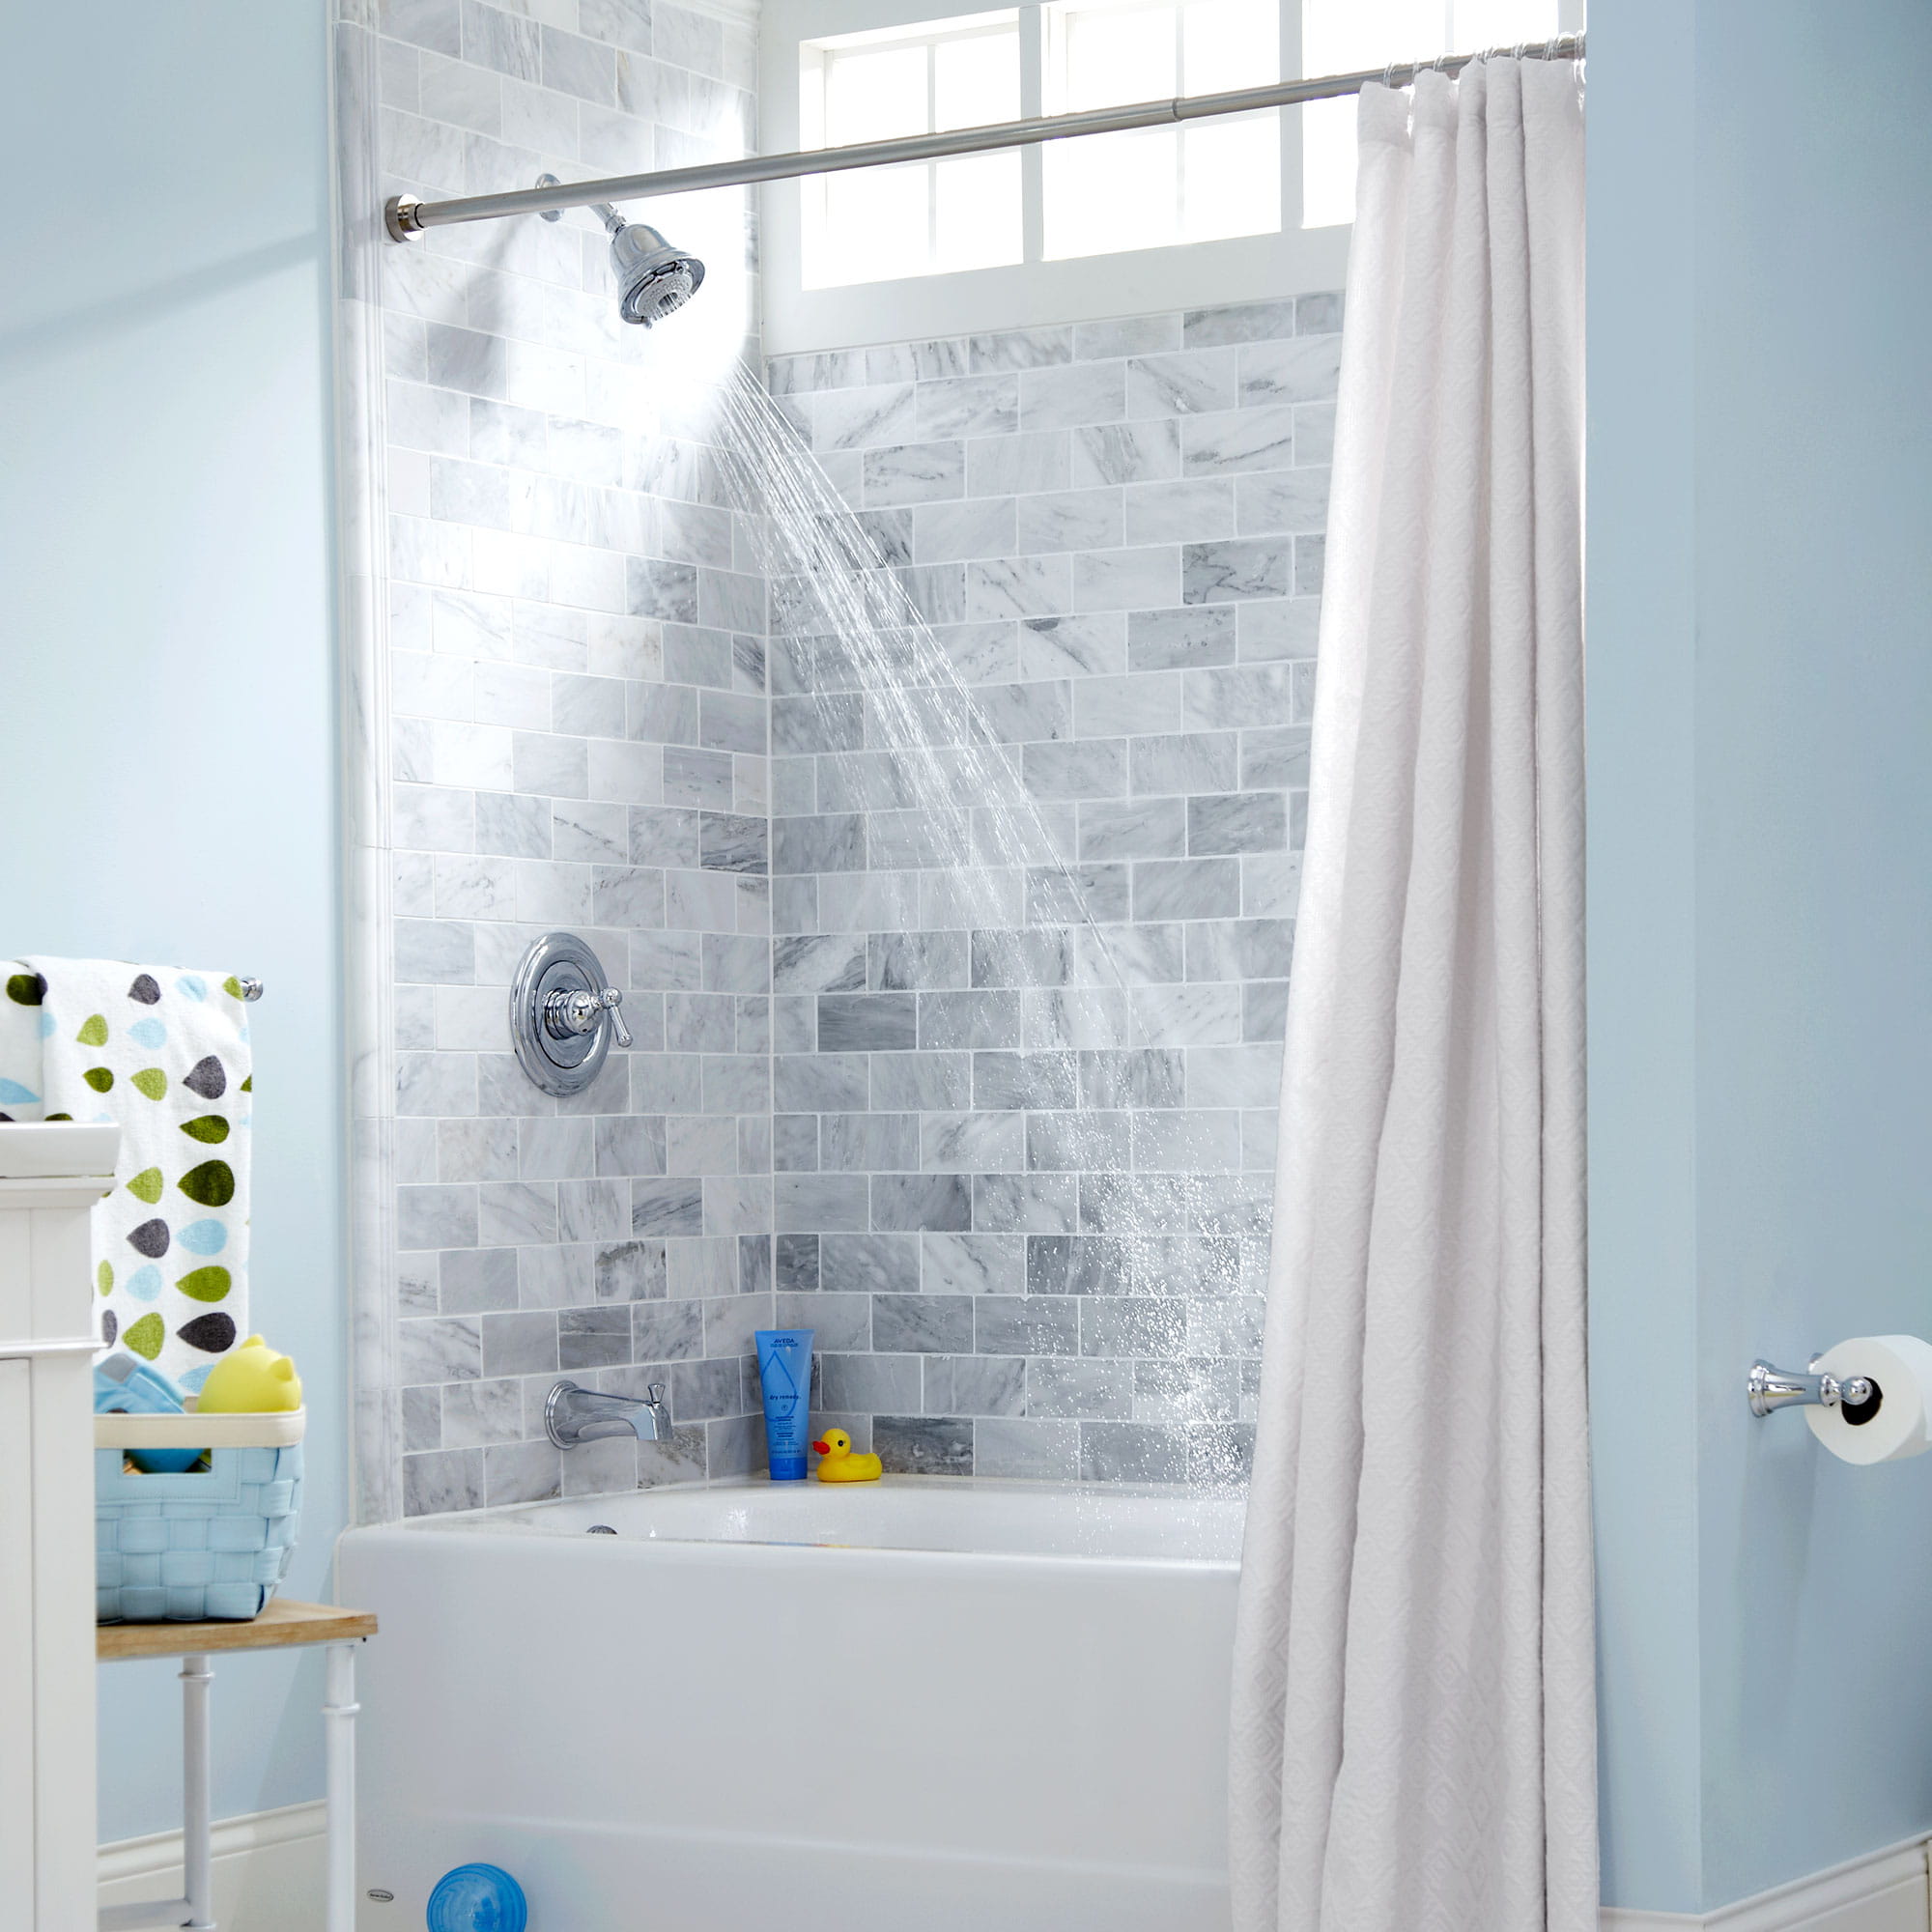 Portsmouth 2.0 GPM Tub and Shower Trim Kit with FloWise Showerhead and Lever Handle